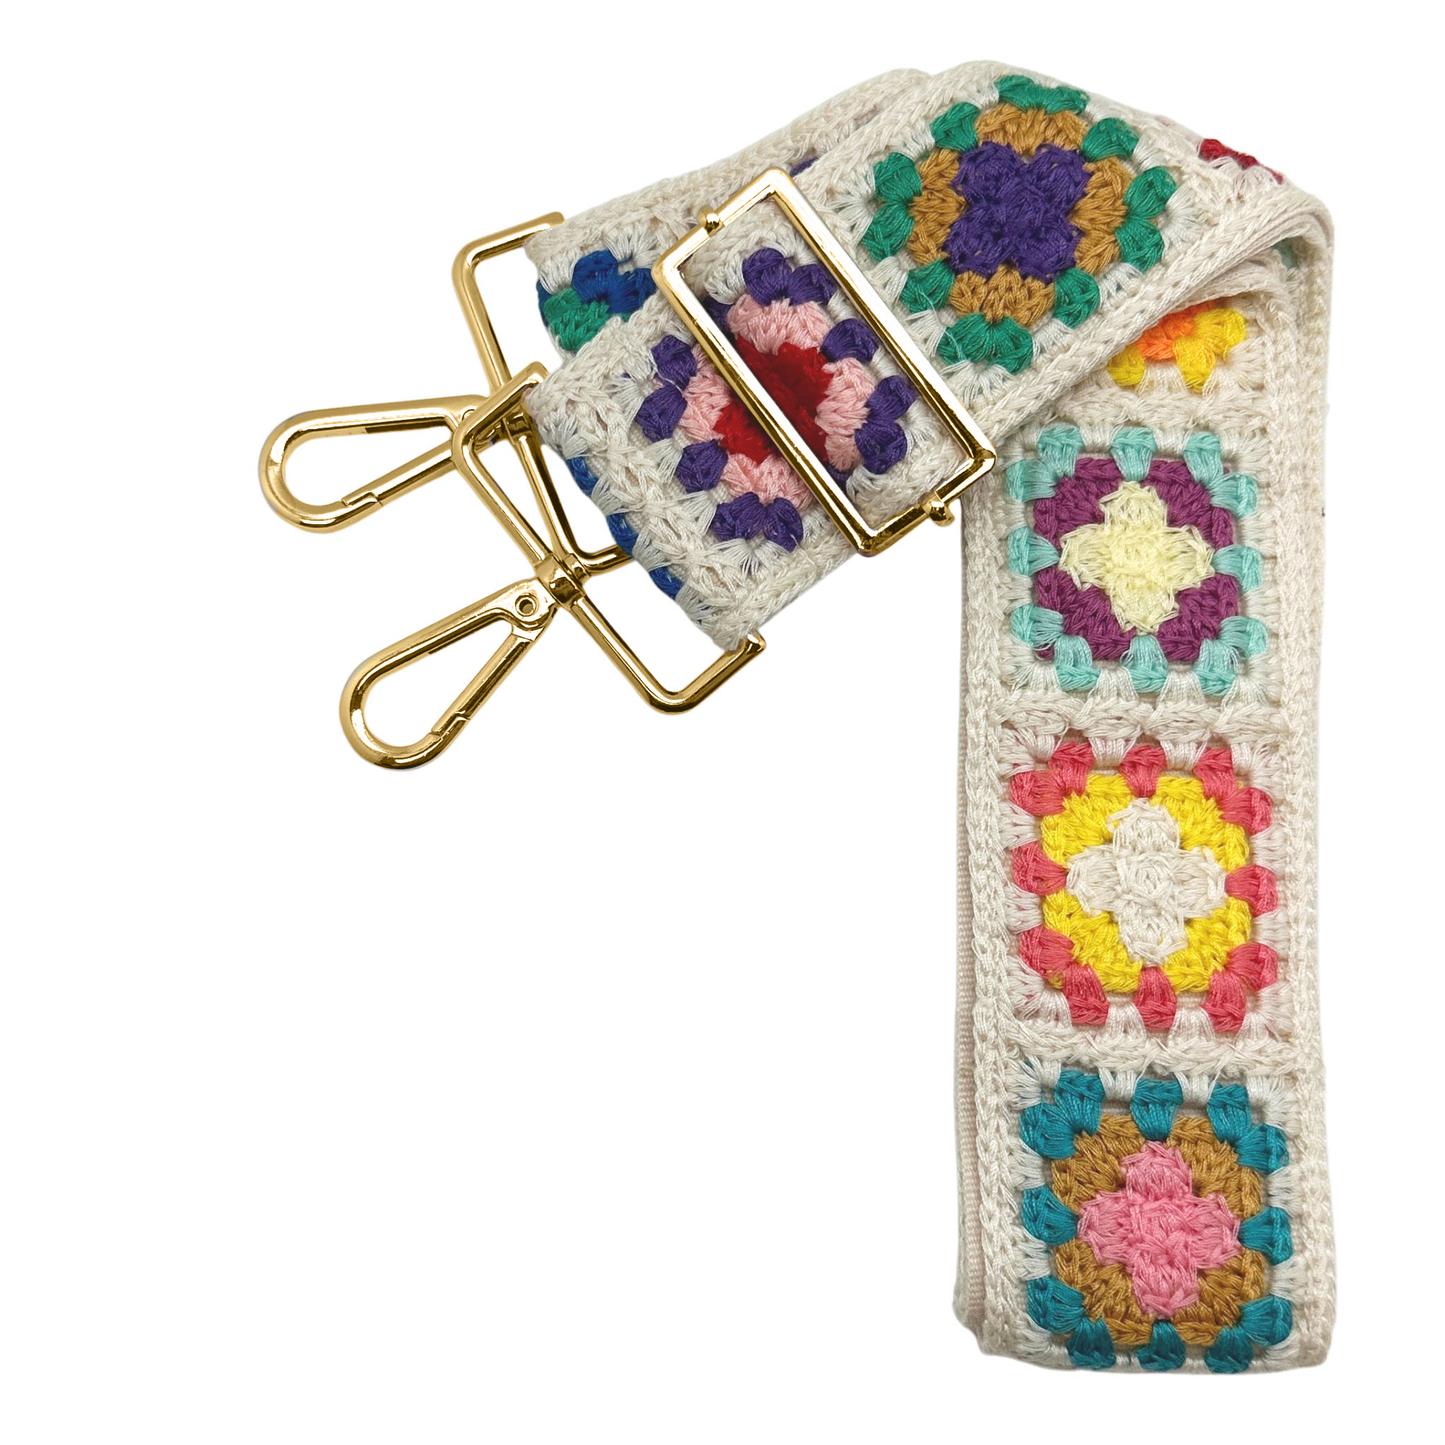 Crossbody Strap in Colorful Crocheted